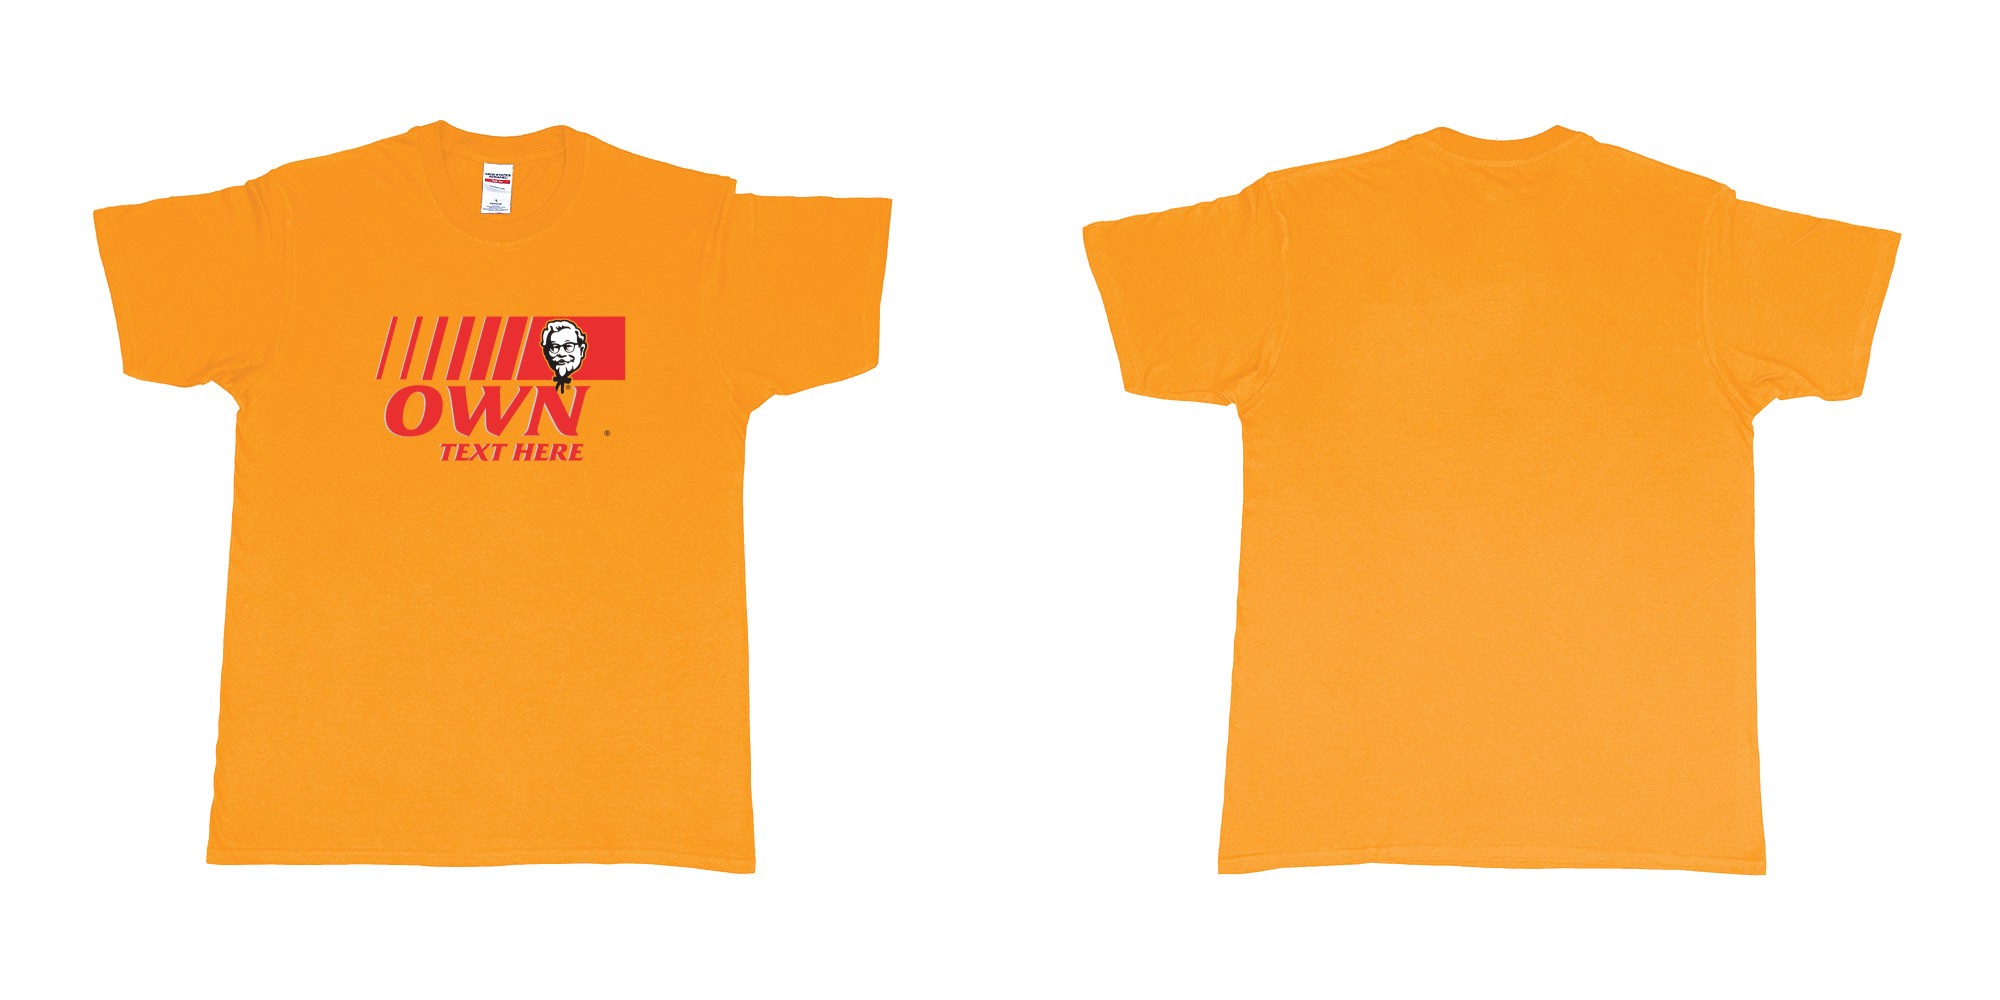 Custom tshirt design KFC in fabric color gold choice your own text made in Bali by The Pirate Way